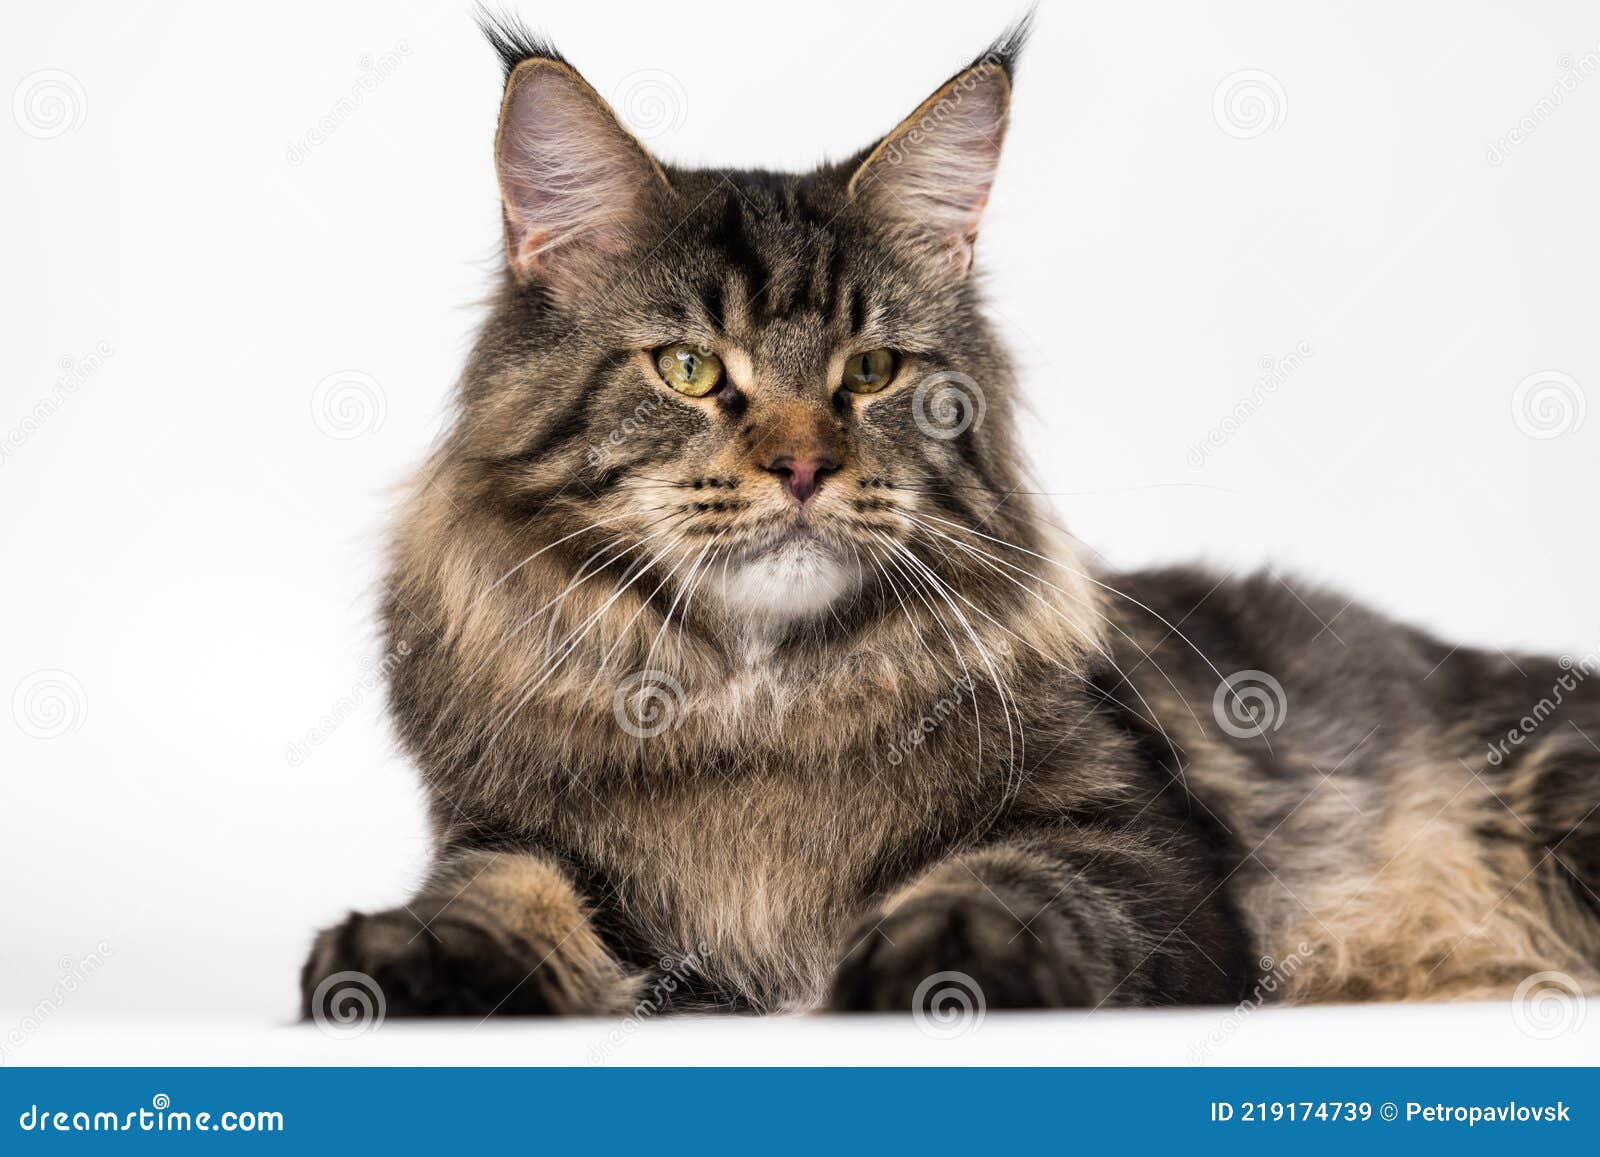 Portrait of Mackerel Tabby American Longhair Cat Looking at Camera, Lying  on White Background Stock Image - Image of background, mammal: 219174739